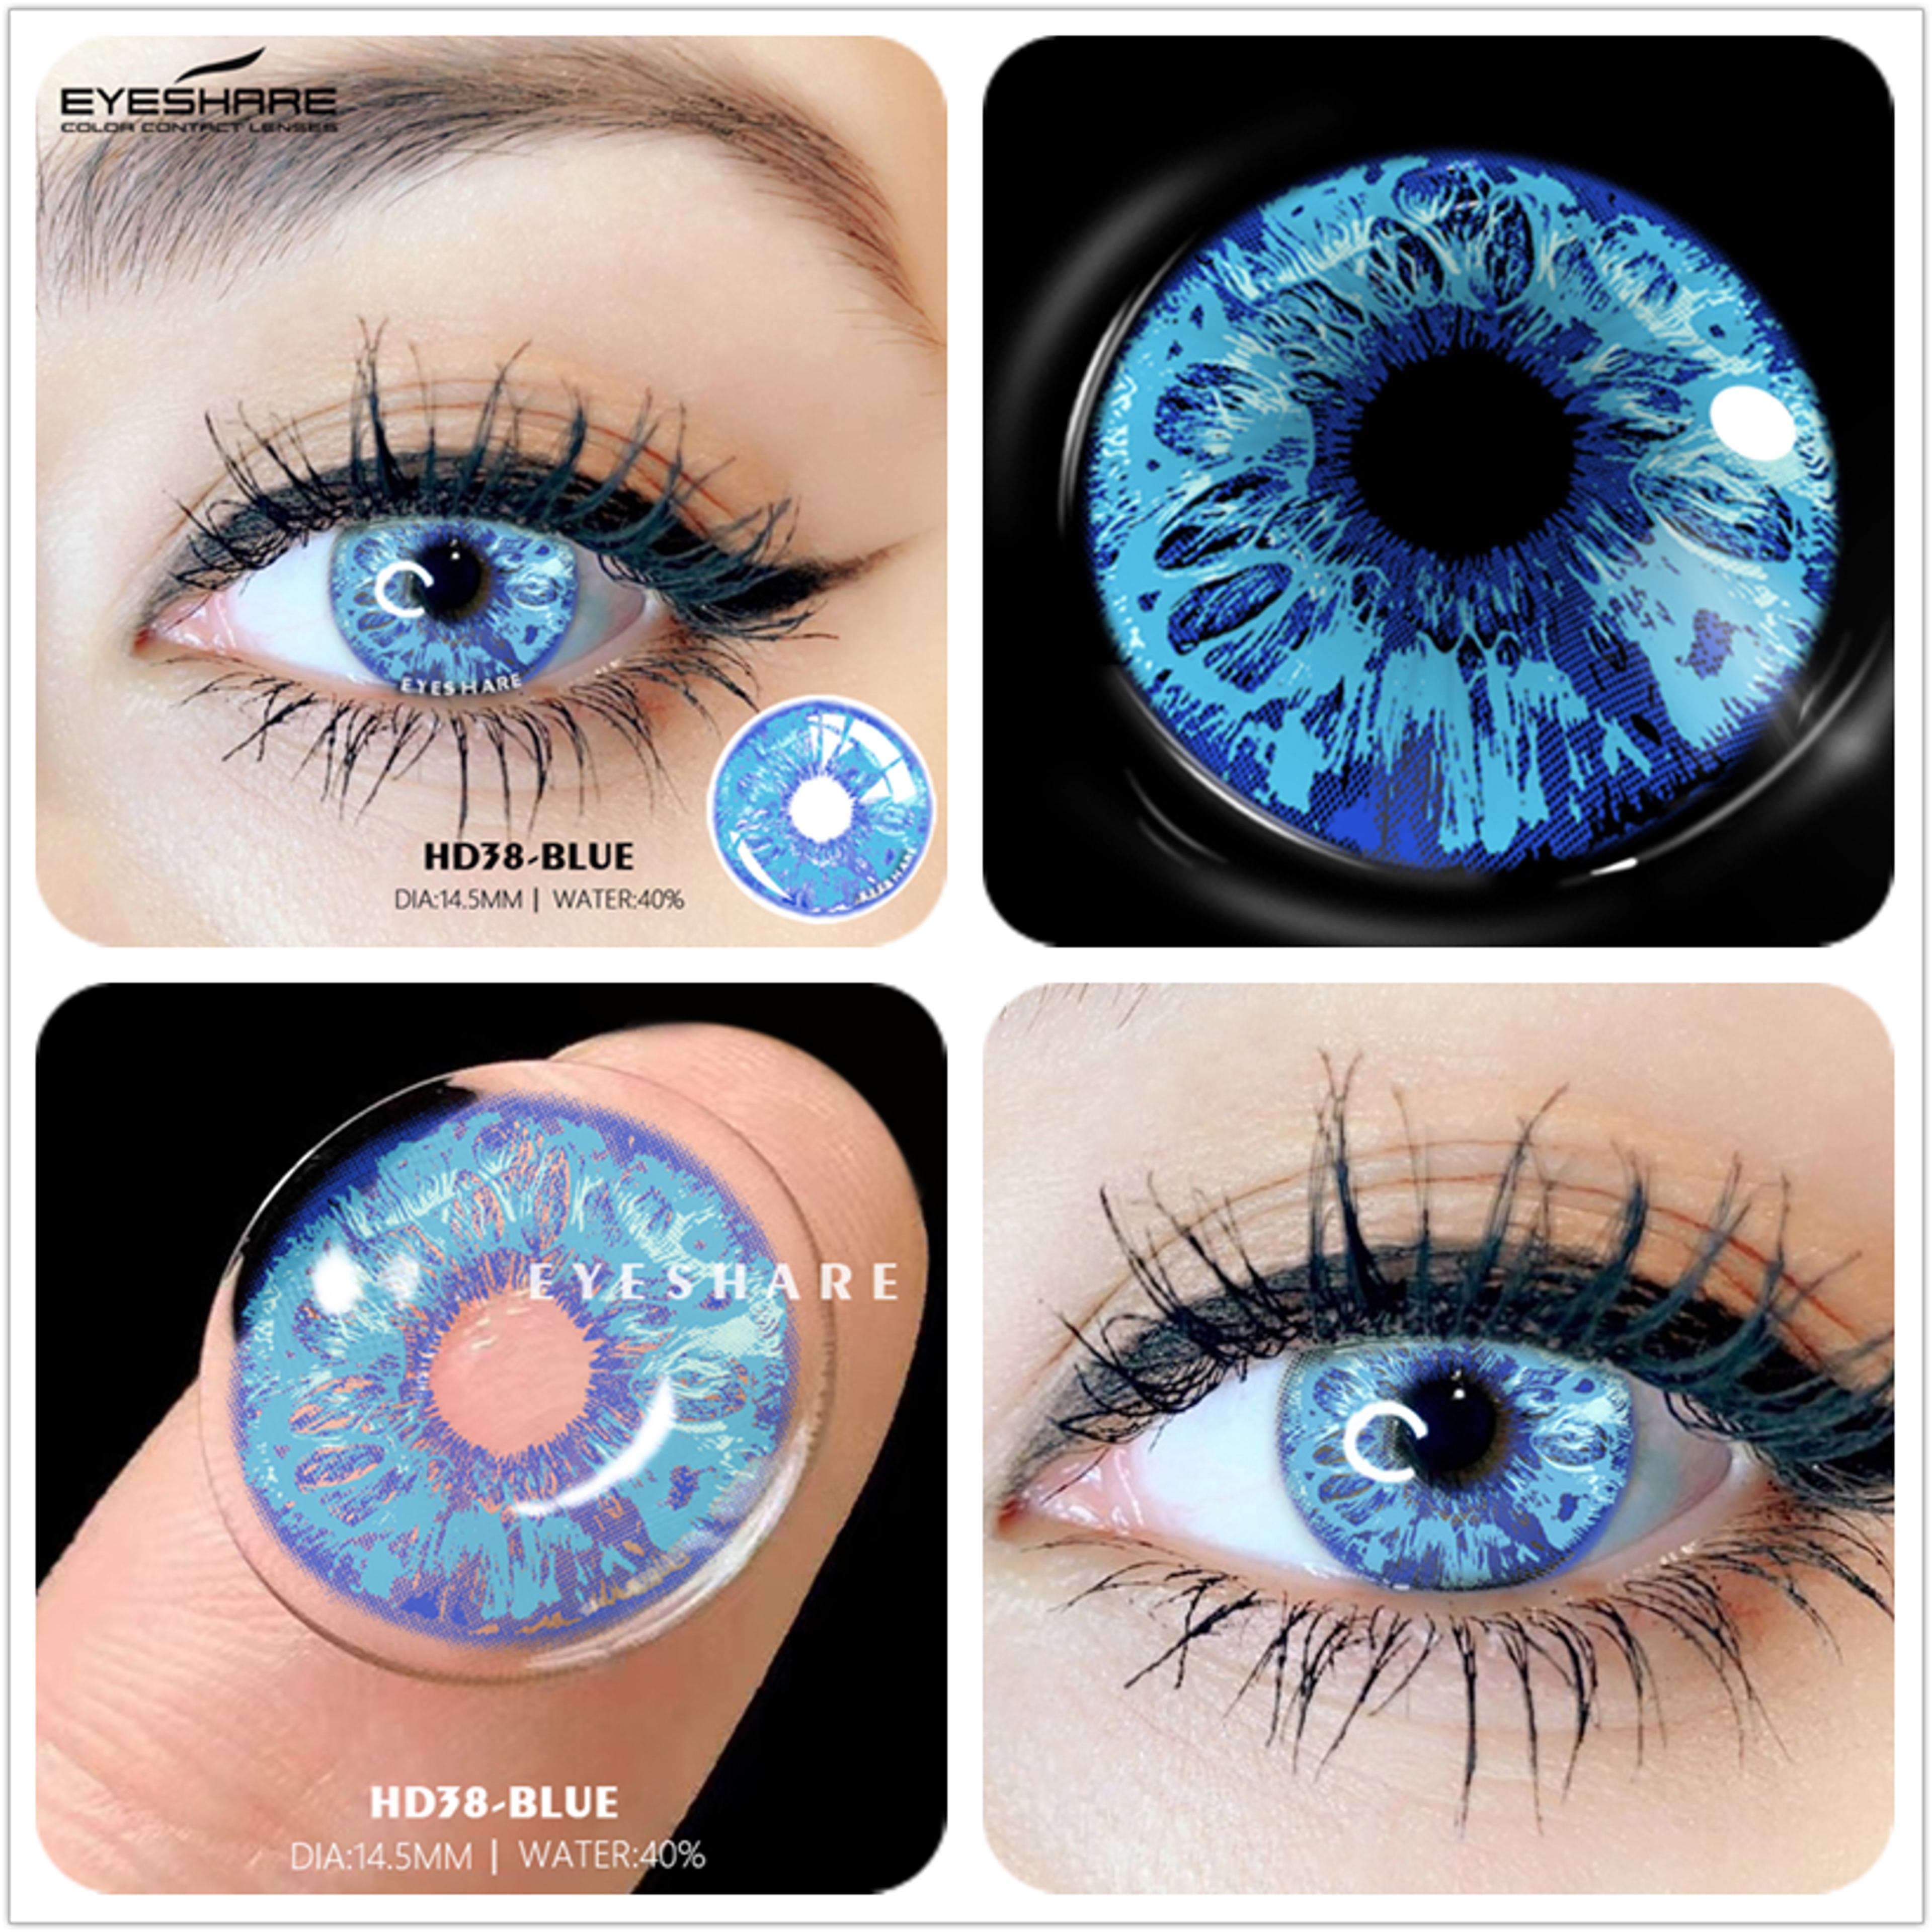 2pcs Colored Contact Lenses For Eyes Cosplay Colored Lenses Blue Contact Lens Yearly Beautiful Pupil Eyes Contact Lens - HD38-BLUE